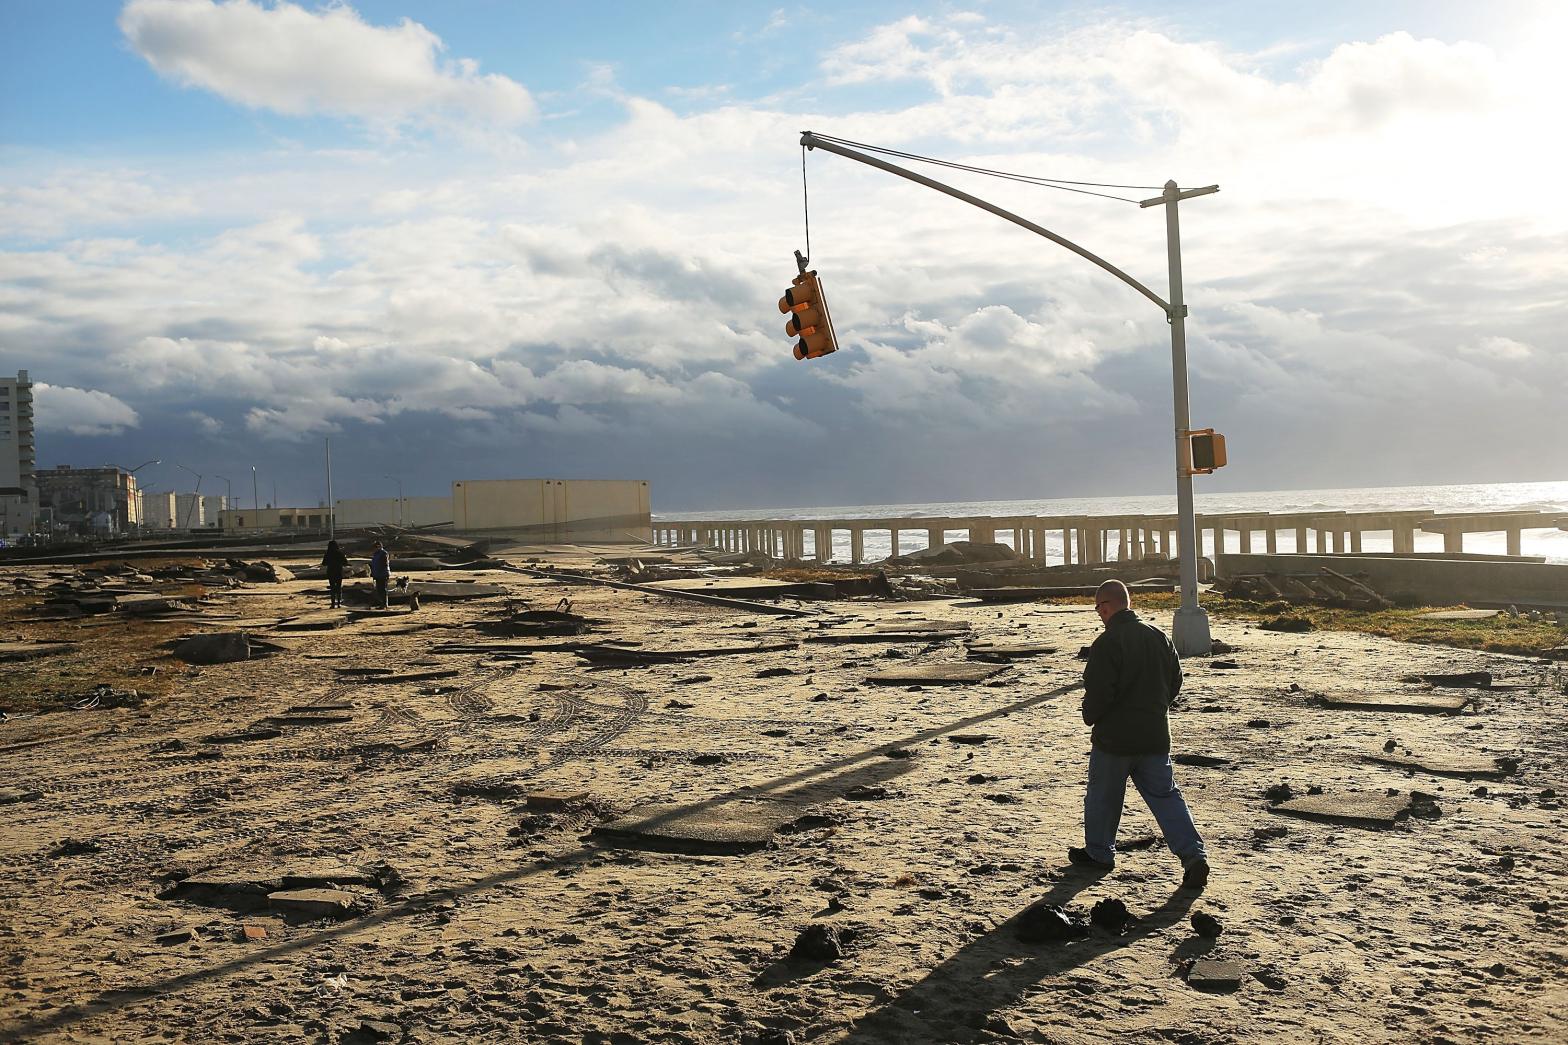 A man walks by the remains of part of the historic Rockaway boardwalk in New York City after large parts of it were washed away during Hurricane Sandy on October 31, 2012. (Photo: Spencer Platt, Getty Images)